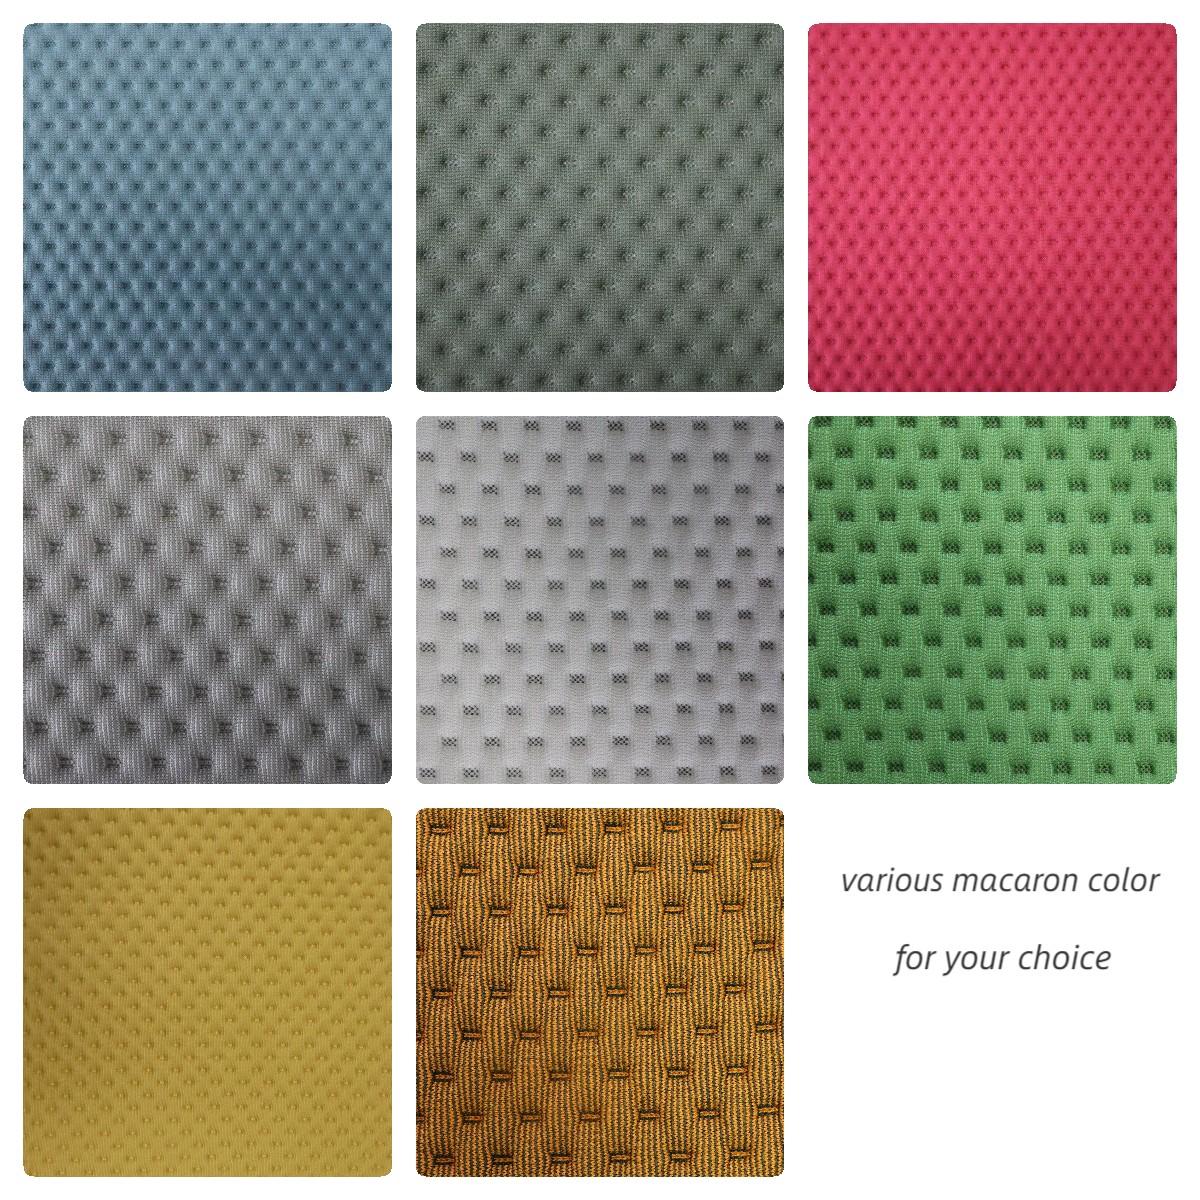 Macaroon color luxe living style sofa fabric 